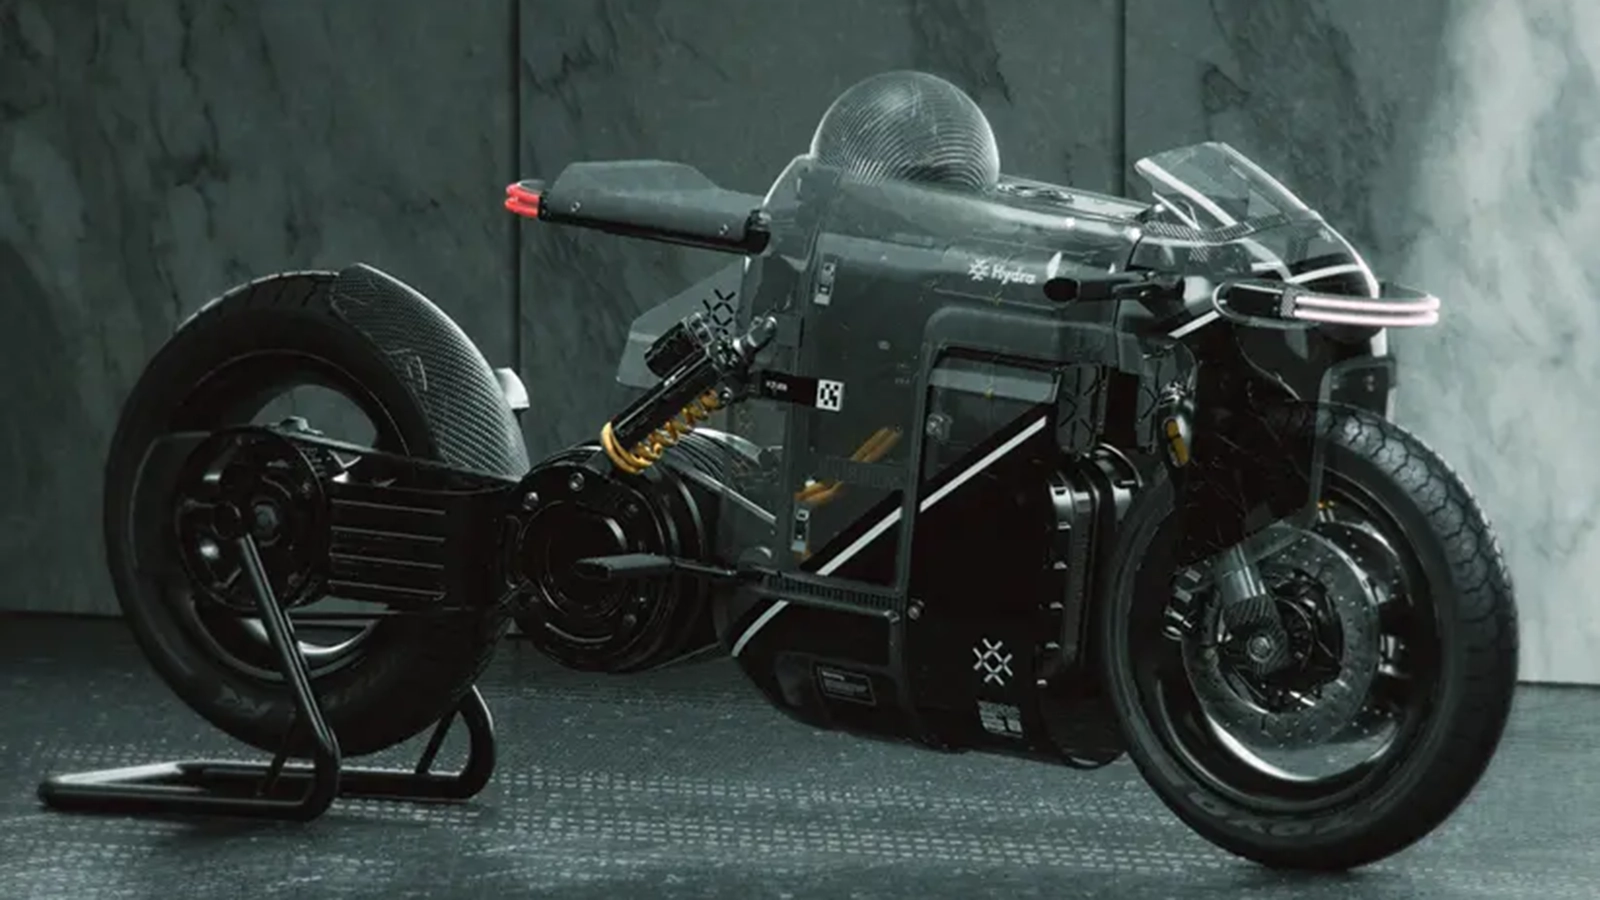 Meet the Hydra: Could this hydrogen-powered machine be the future of motorcycling